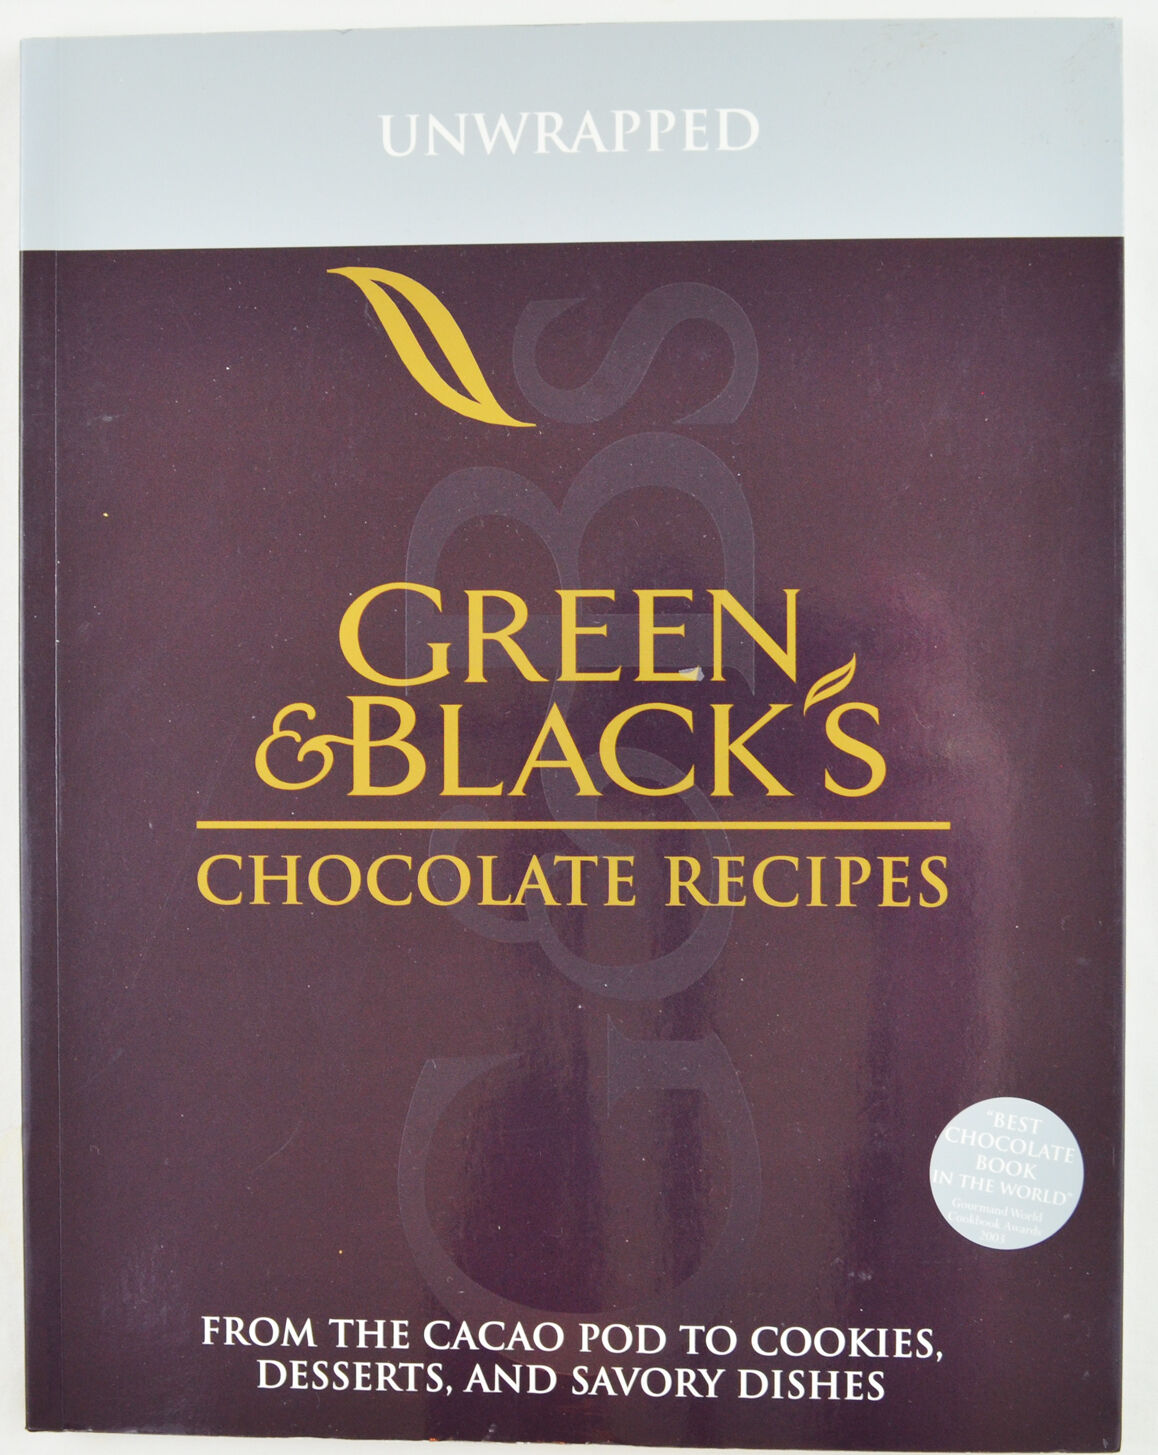 Unwrapped Green and Black's Chocolate Recipes Book Recipes by Caroline Jeremy